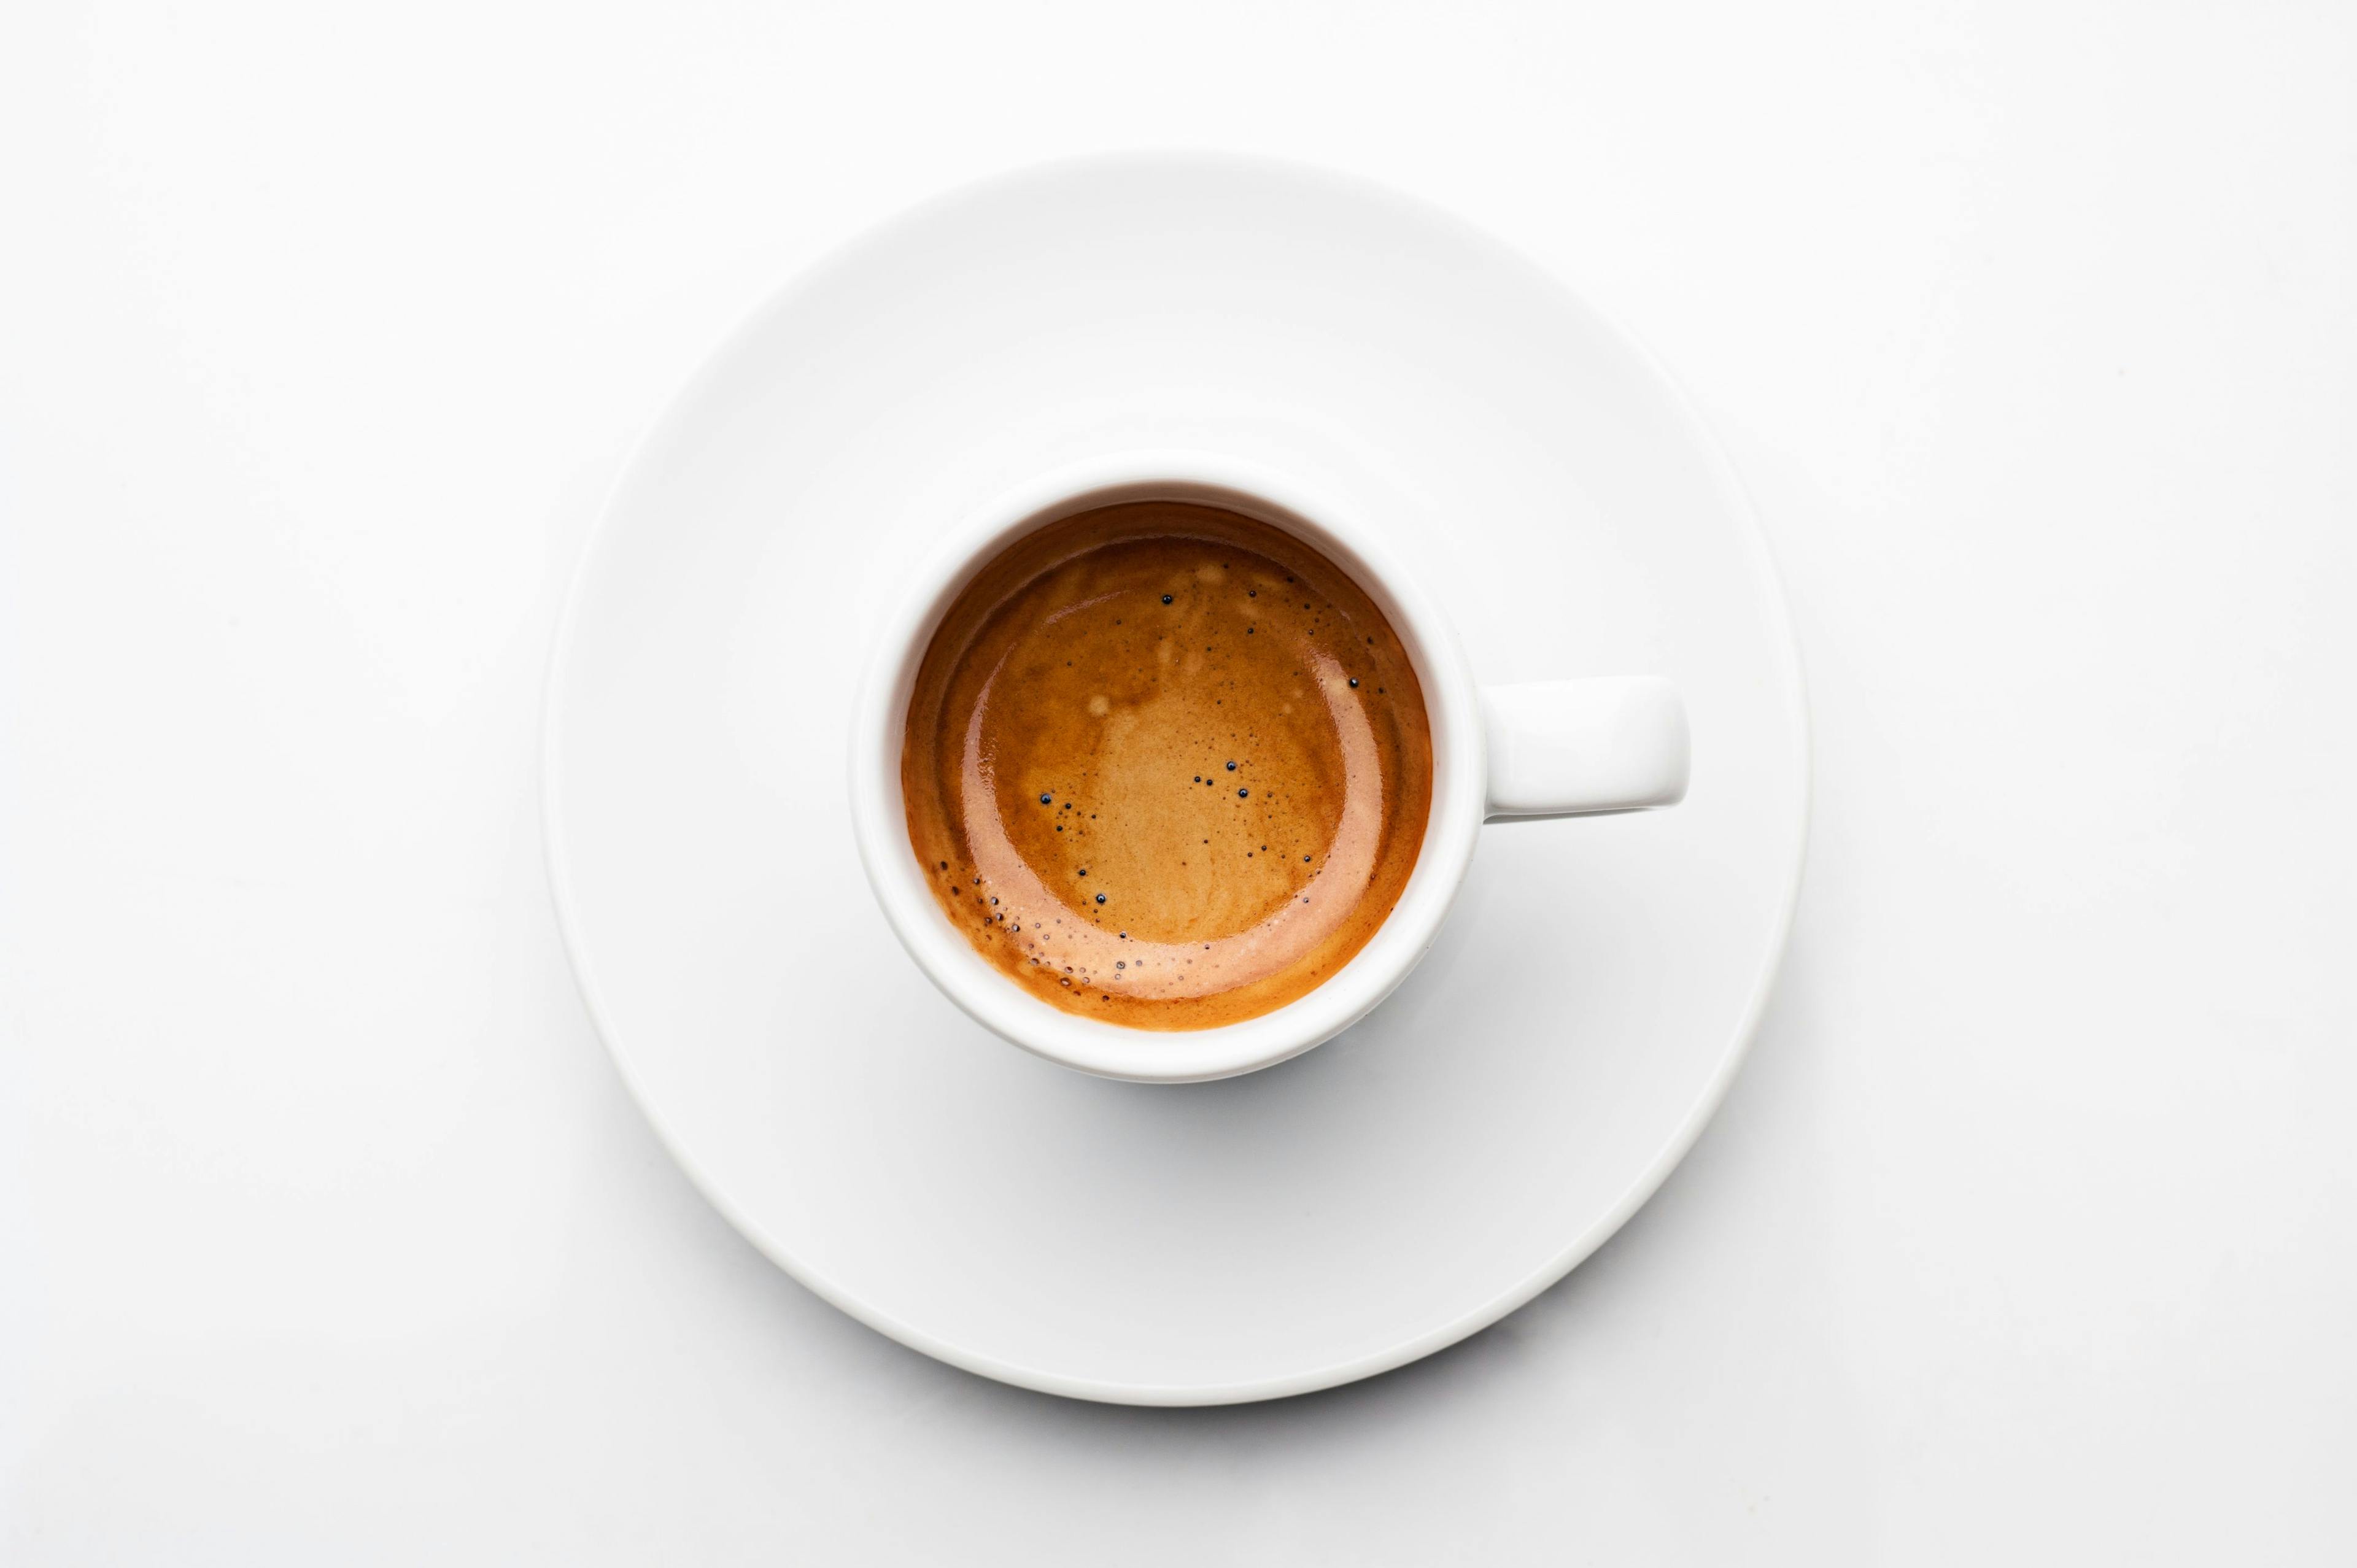 Top view a cup of espresso coffee isolated on white background | Image Credit: joesayhello - stock.adobe.com